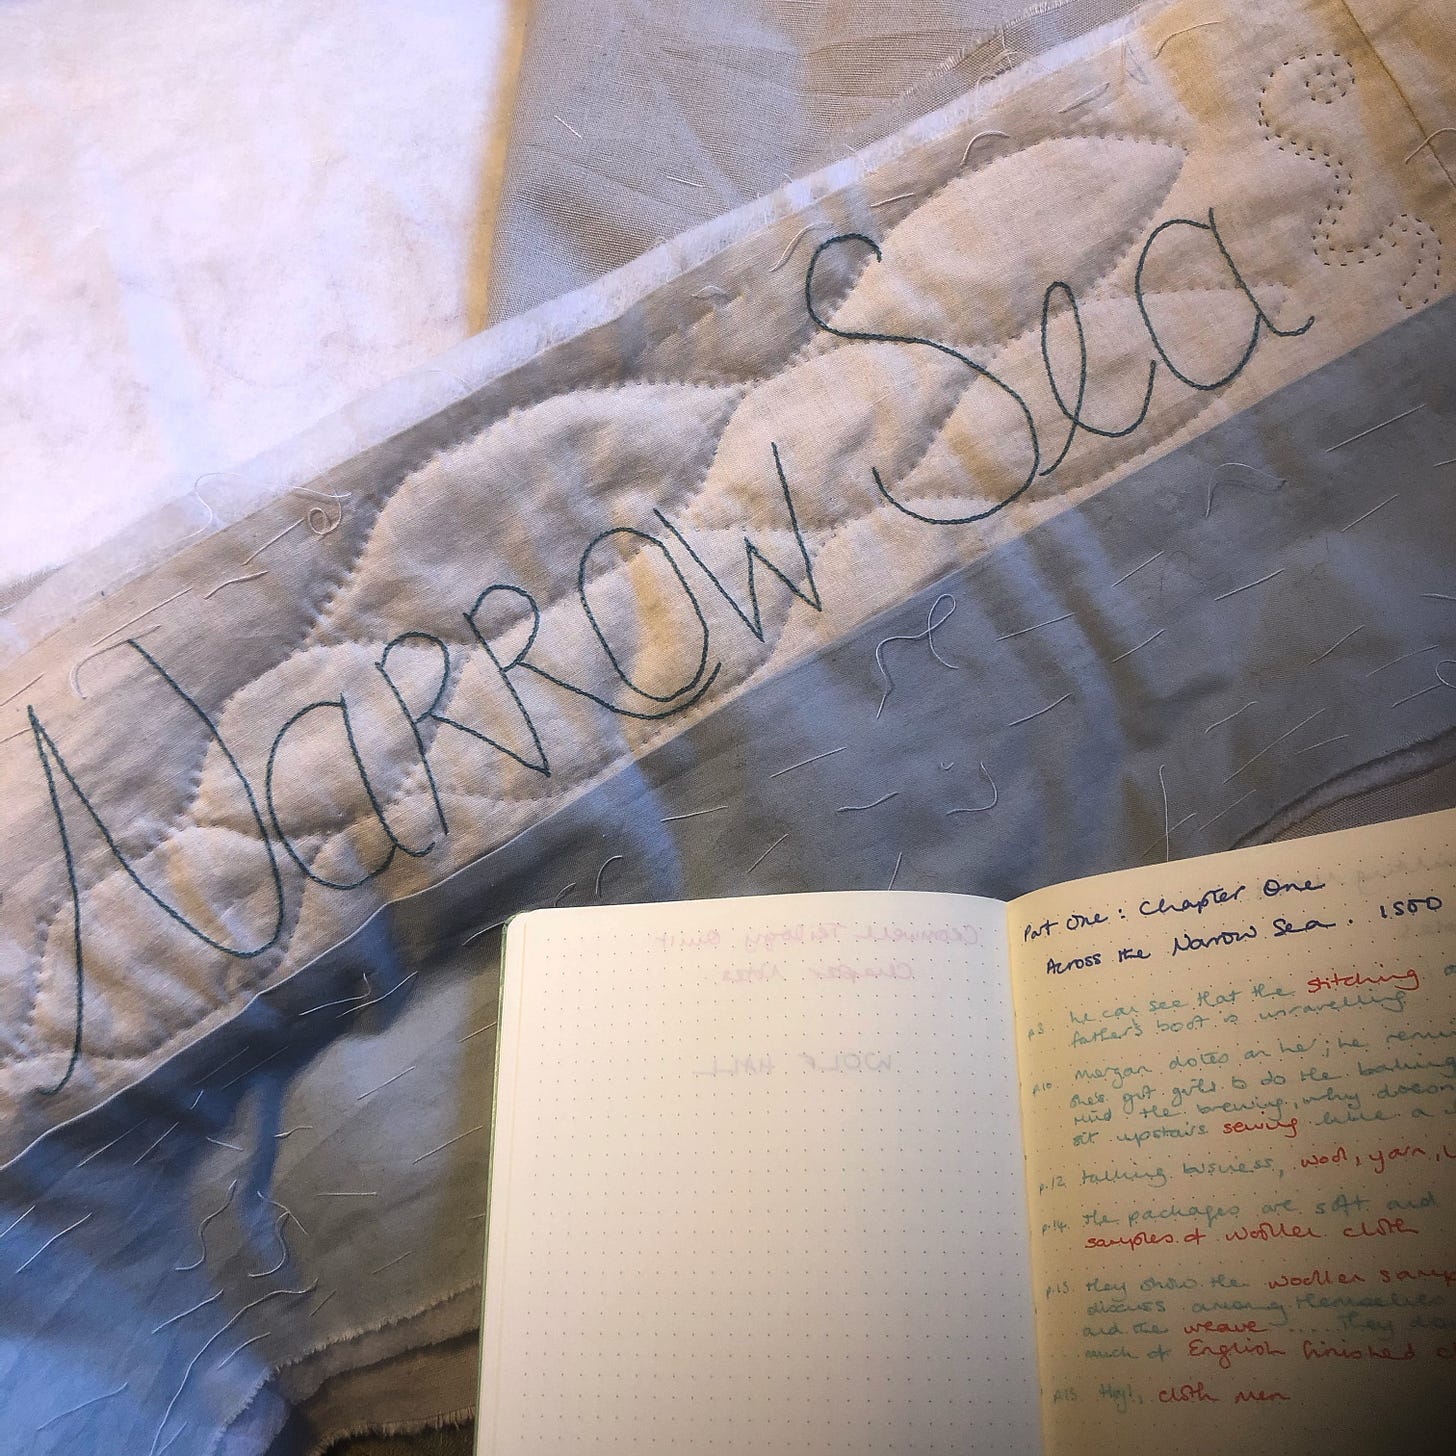 Quilted piece with the words “Narrow Sea” embroidered. Waves and an eel quilted in the background. A notebook in the foreground.